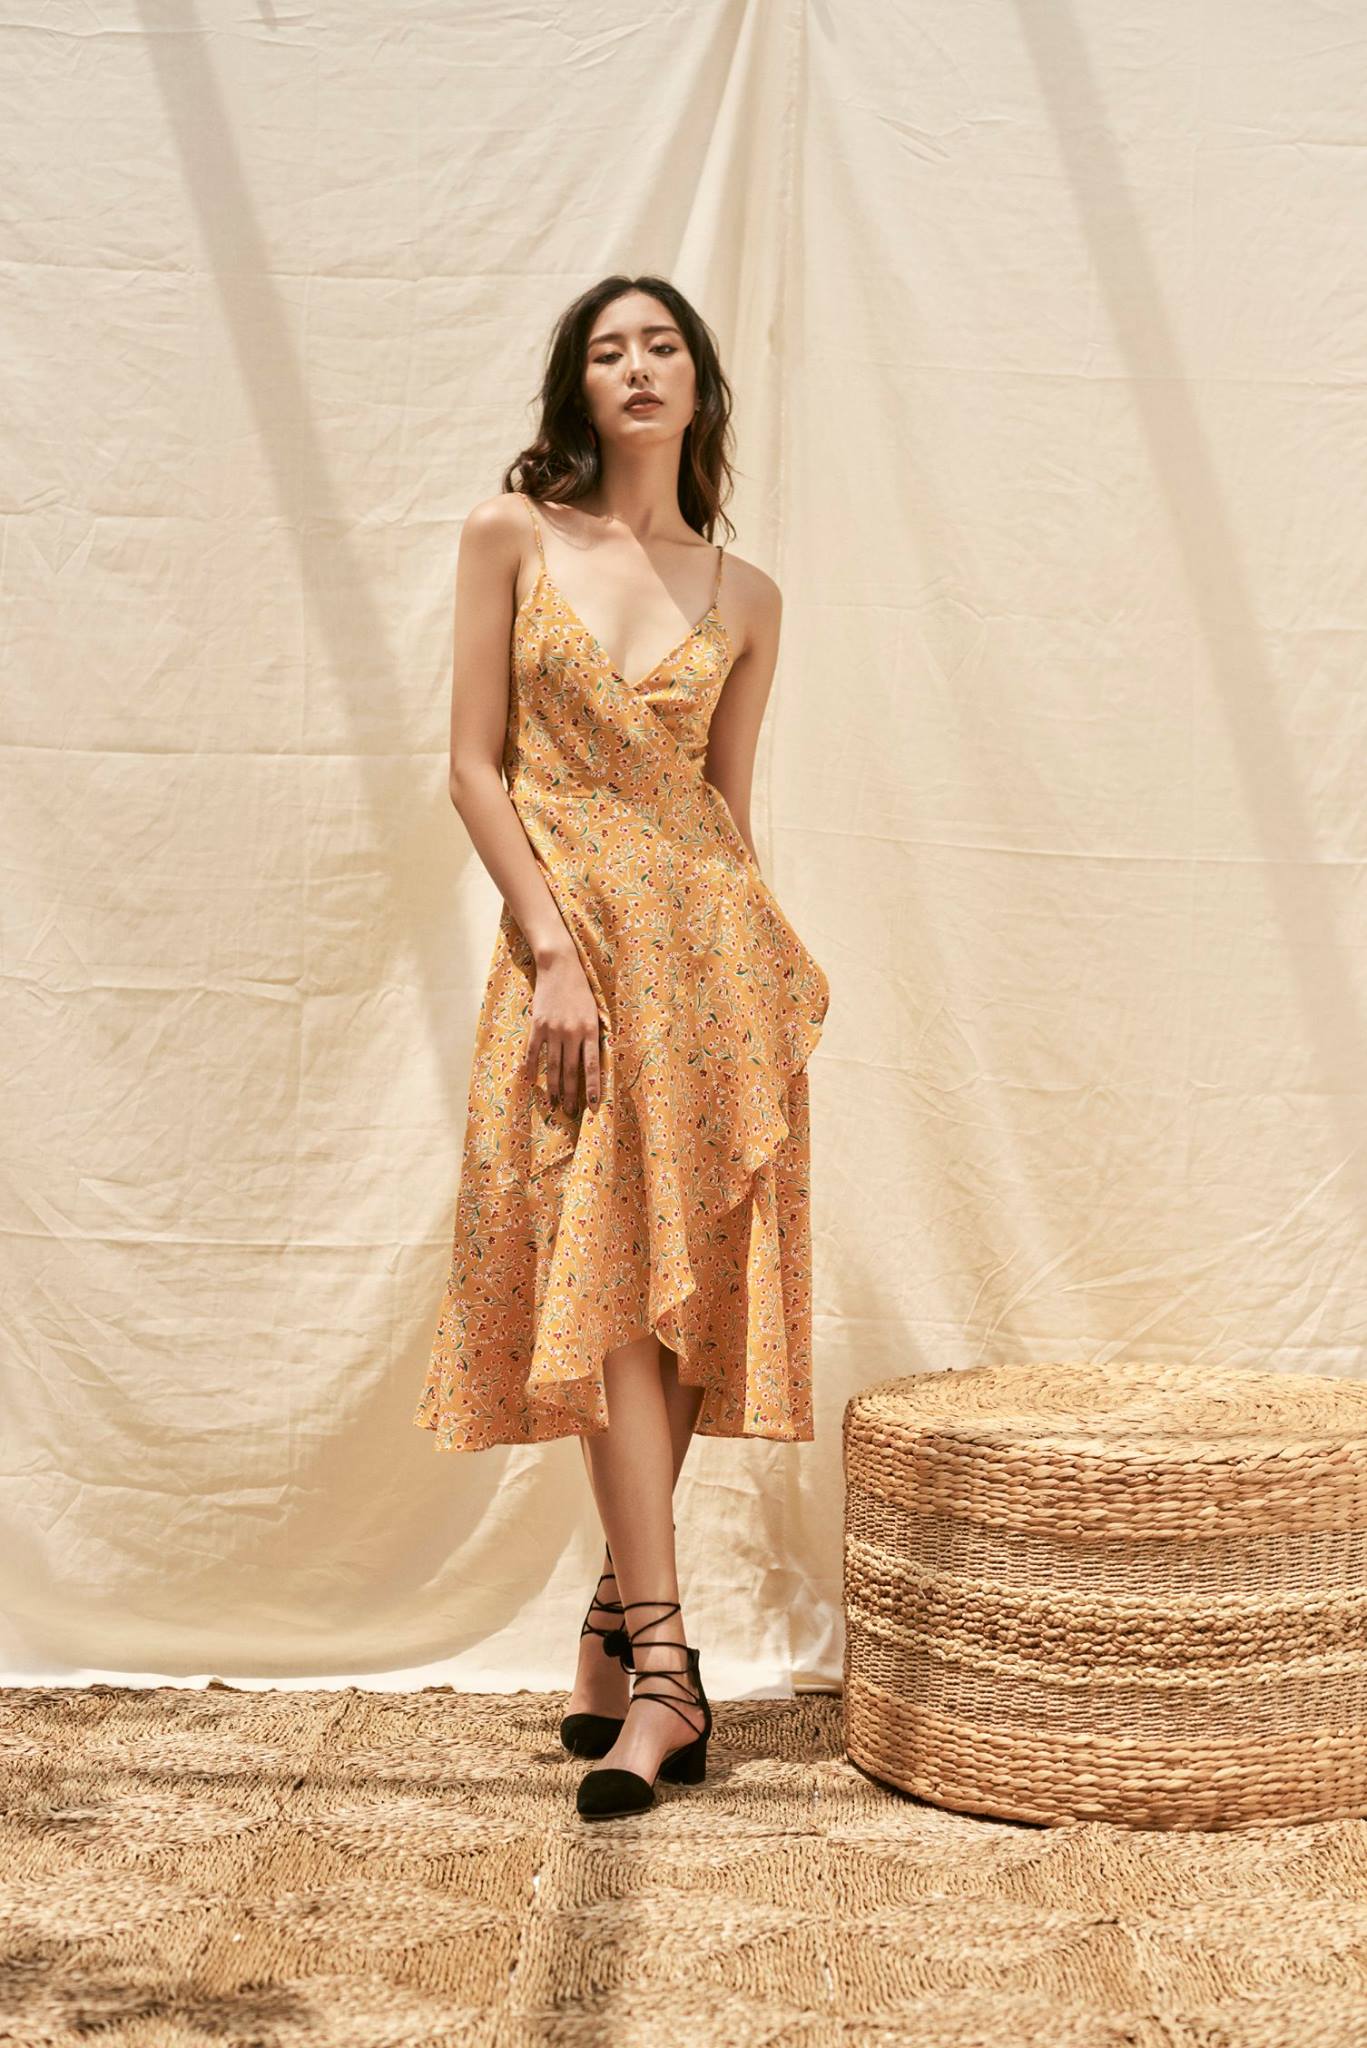 Yellow Floral Dress